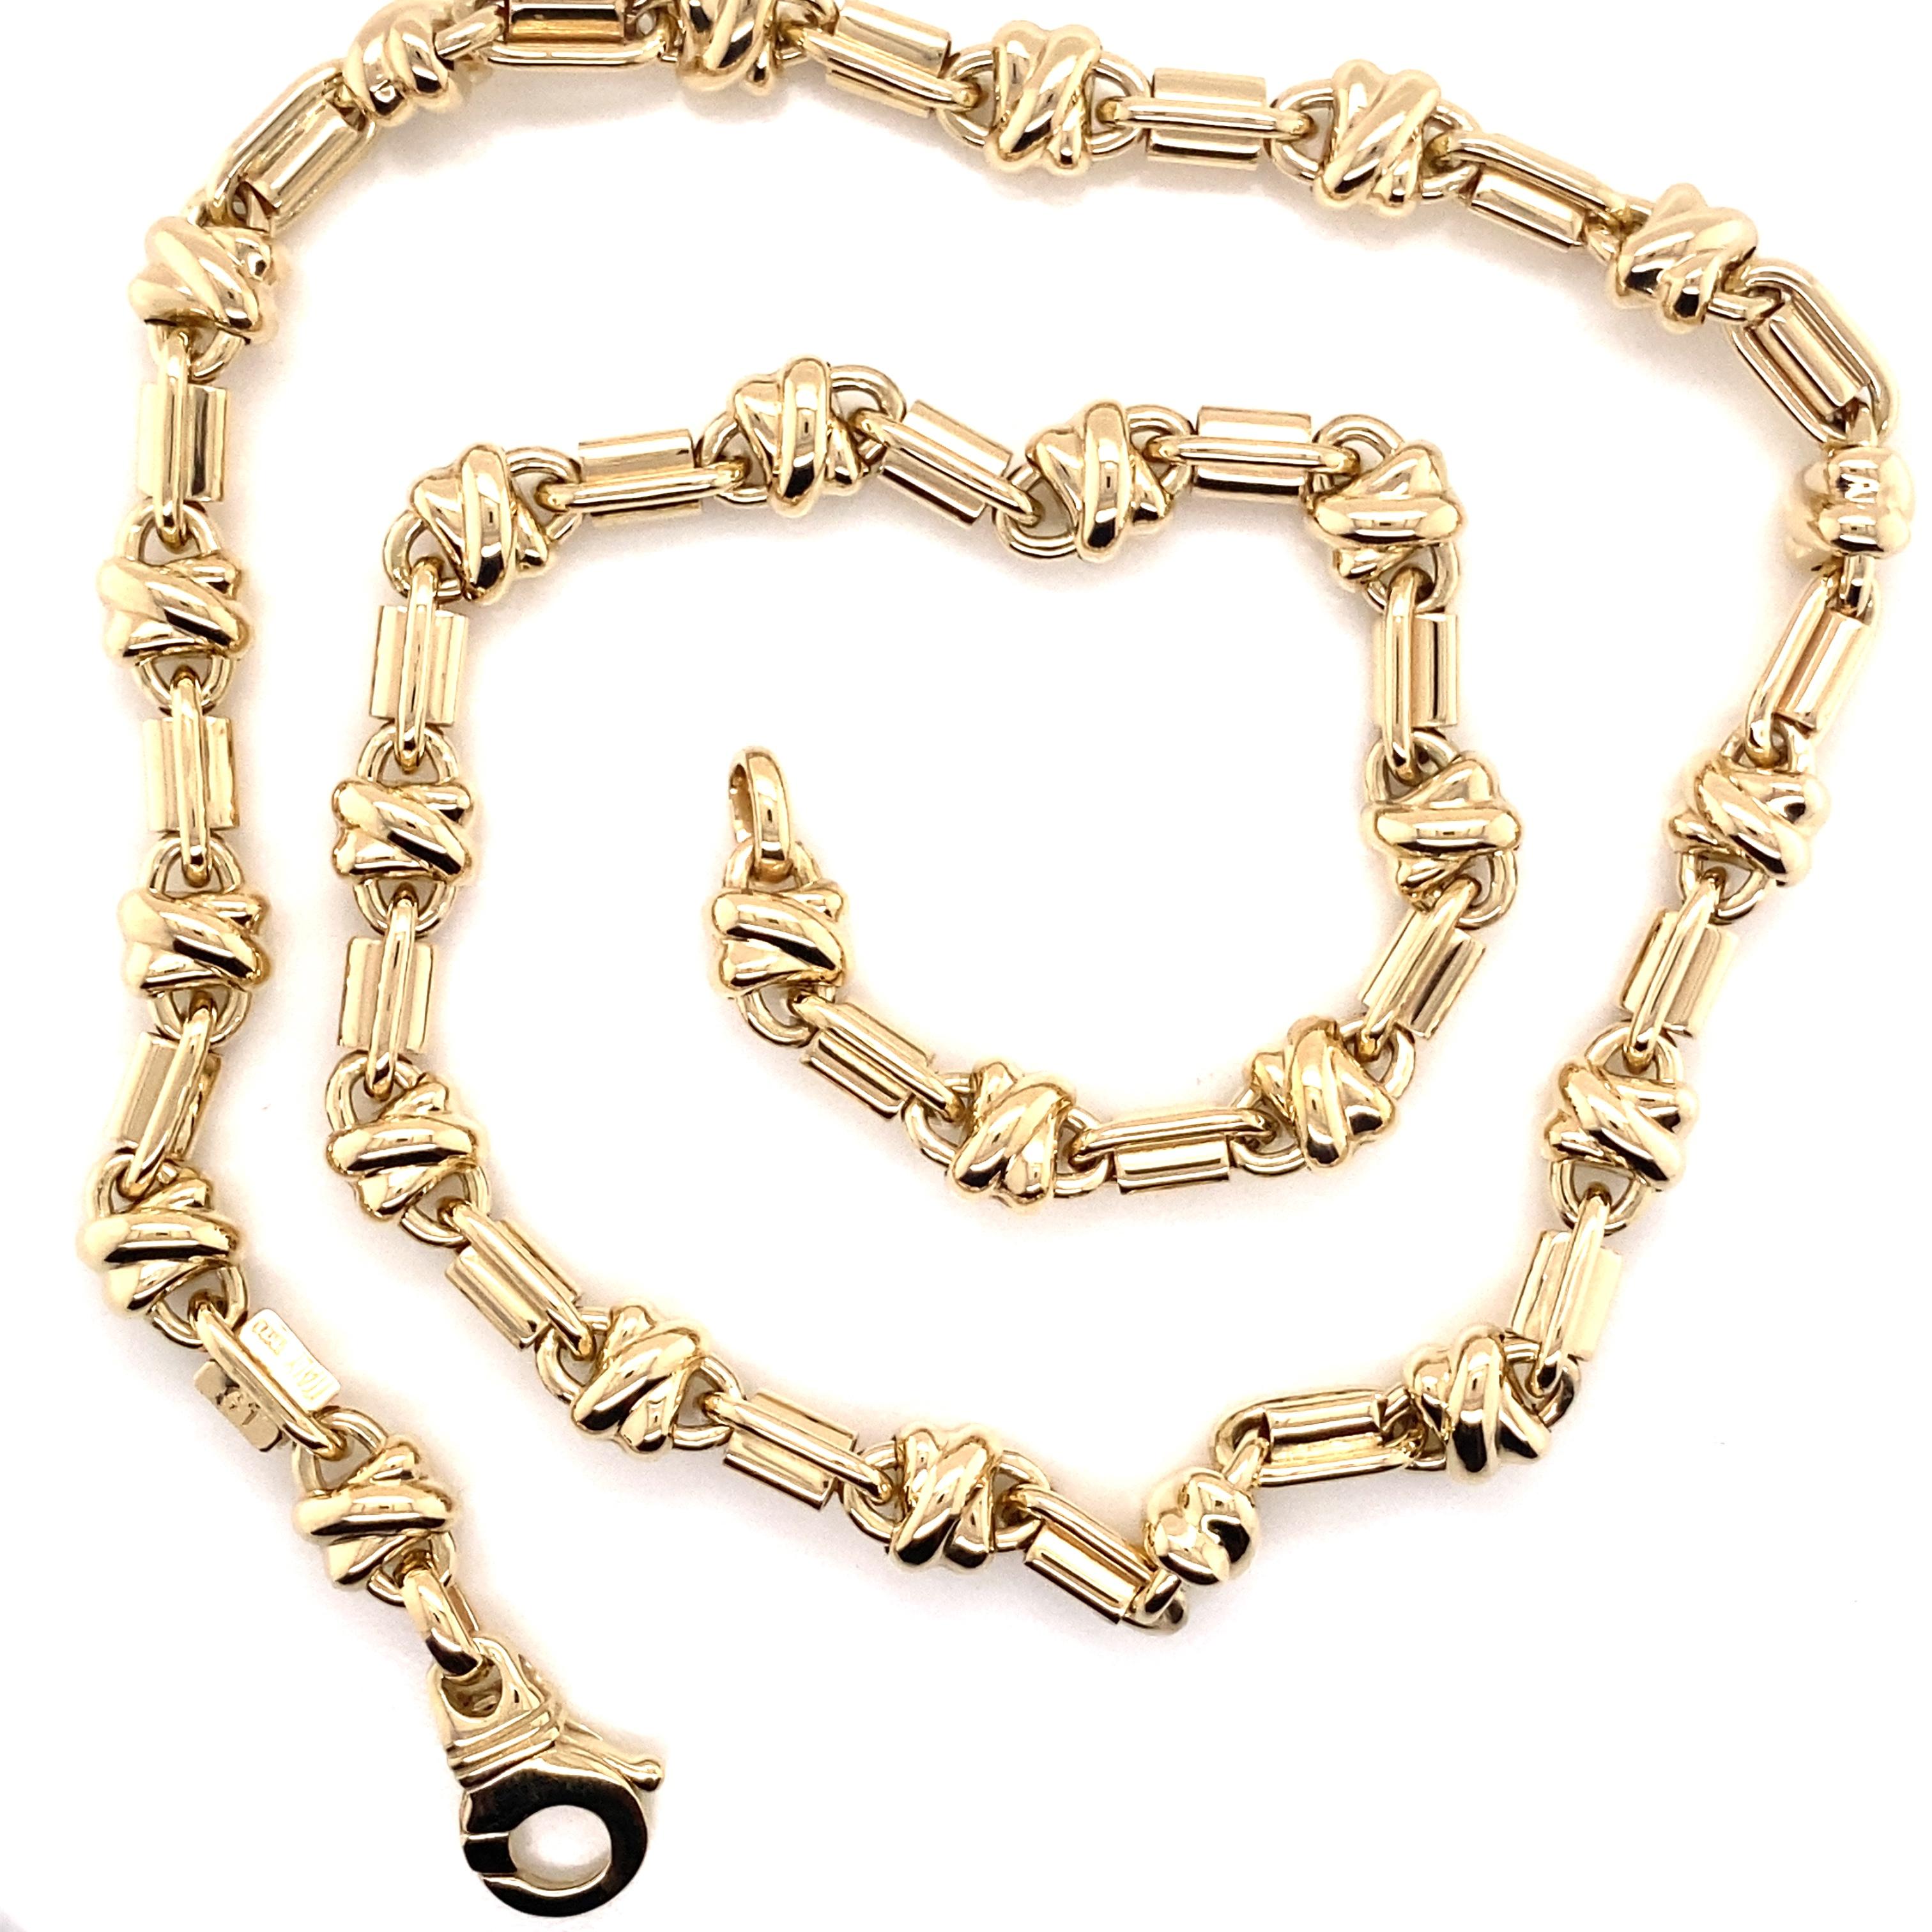 Vintage 1999 14K Yellow Gold Italian Link Necklace - The Italian made necklace is 7.4mm wide and 18 inches long and features a large trigger clasp. The necklace weighs 29 grams.